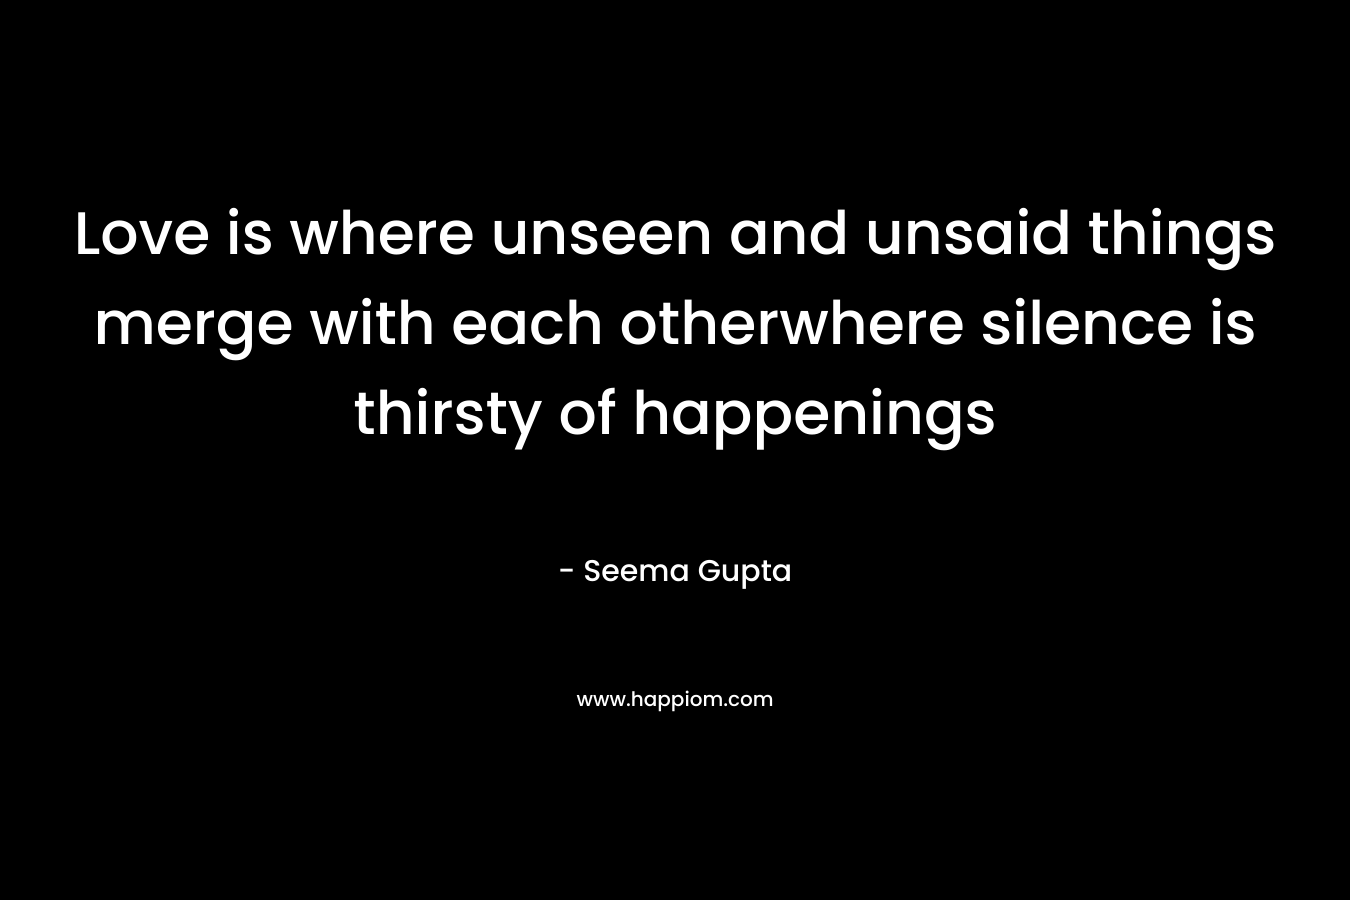 Love is where unseen and unsaid things merge with each otherwhere silence is thirsty of happenings – Seema Gupta